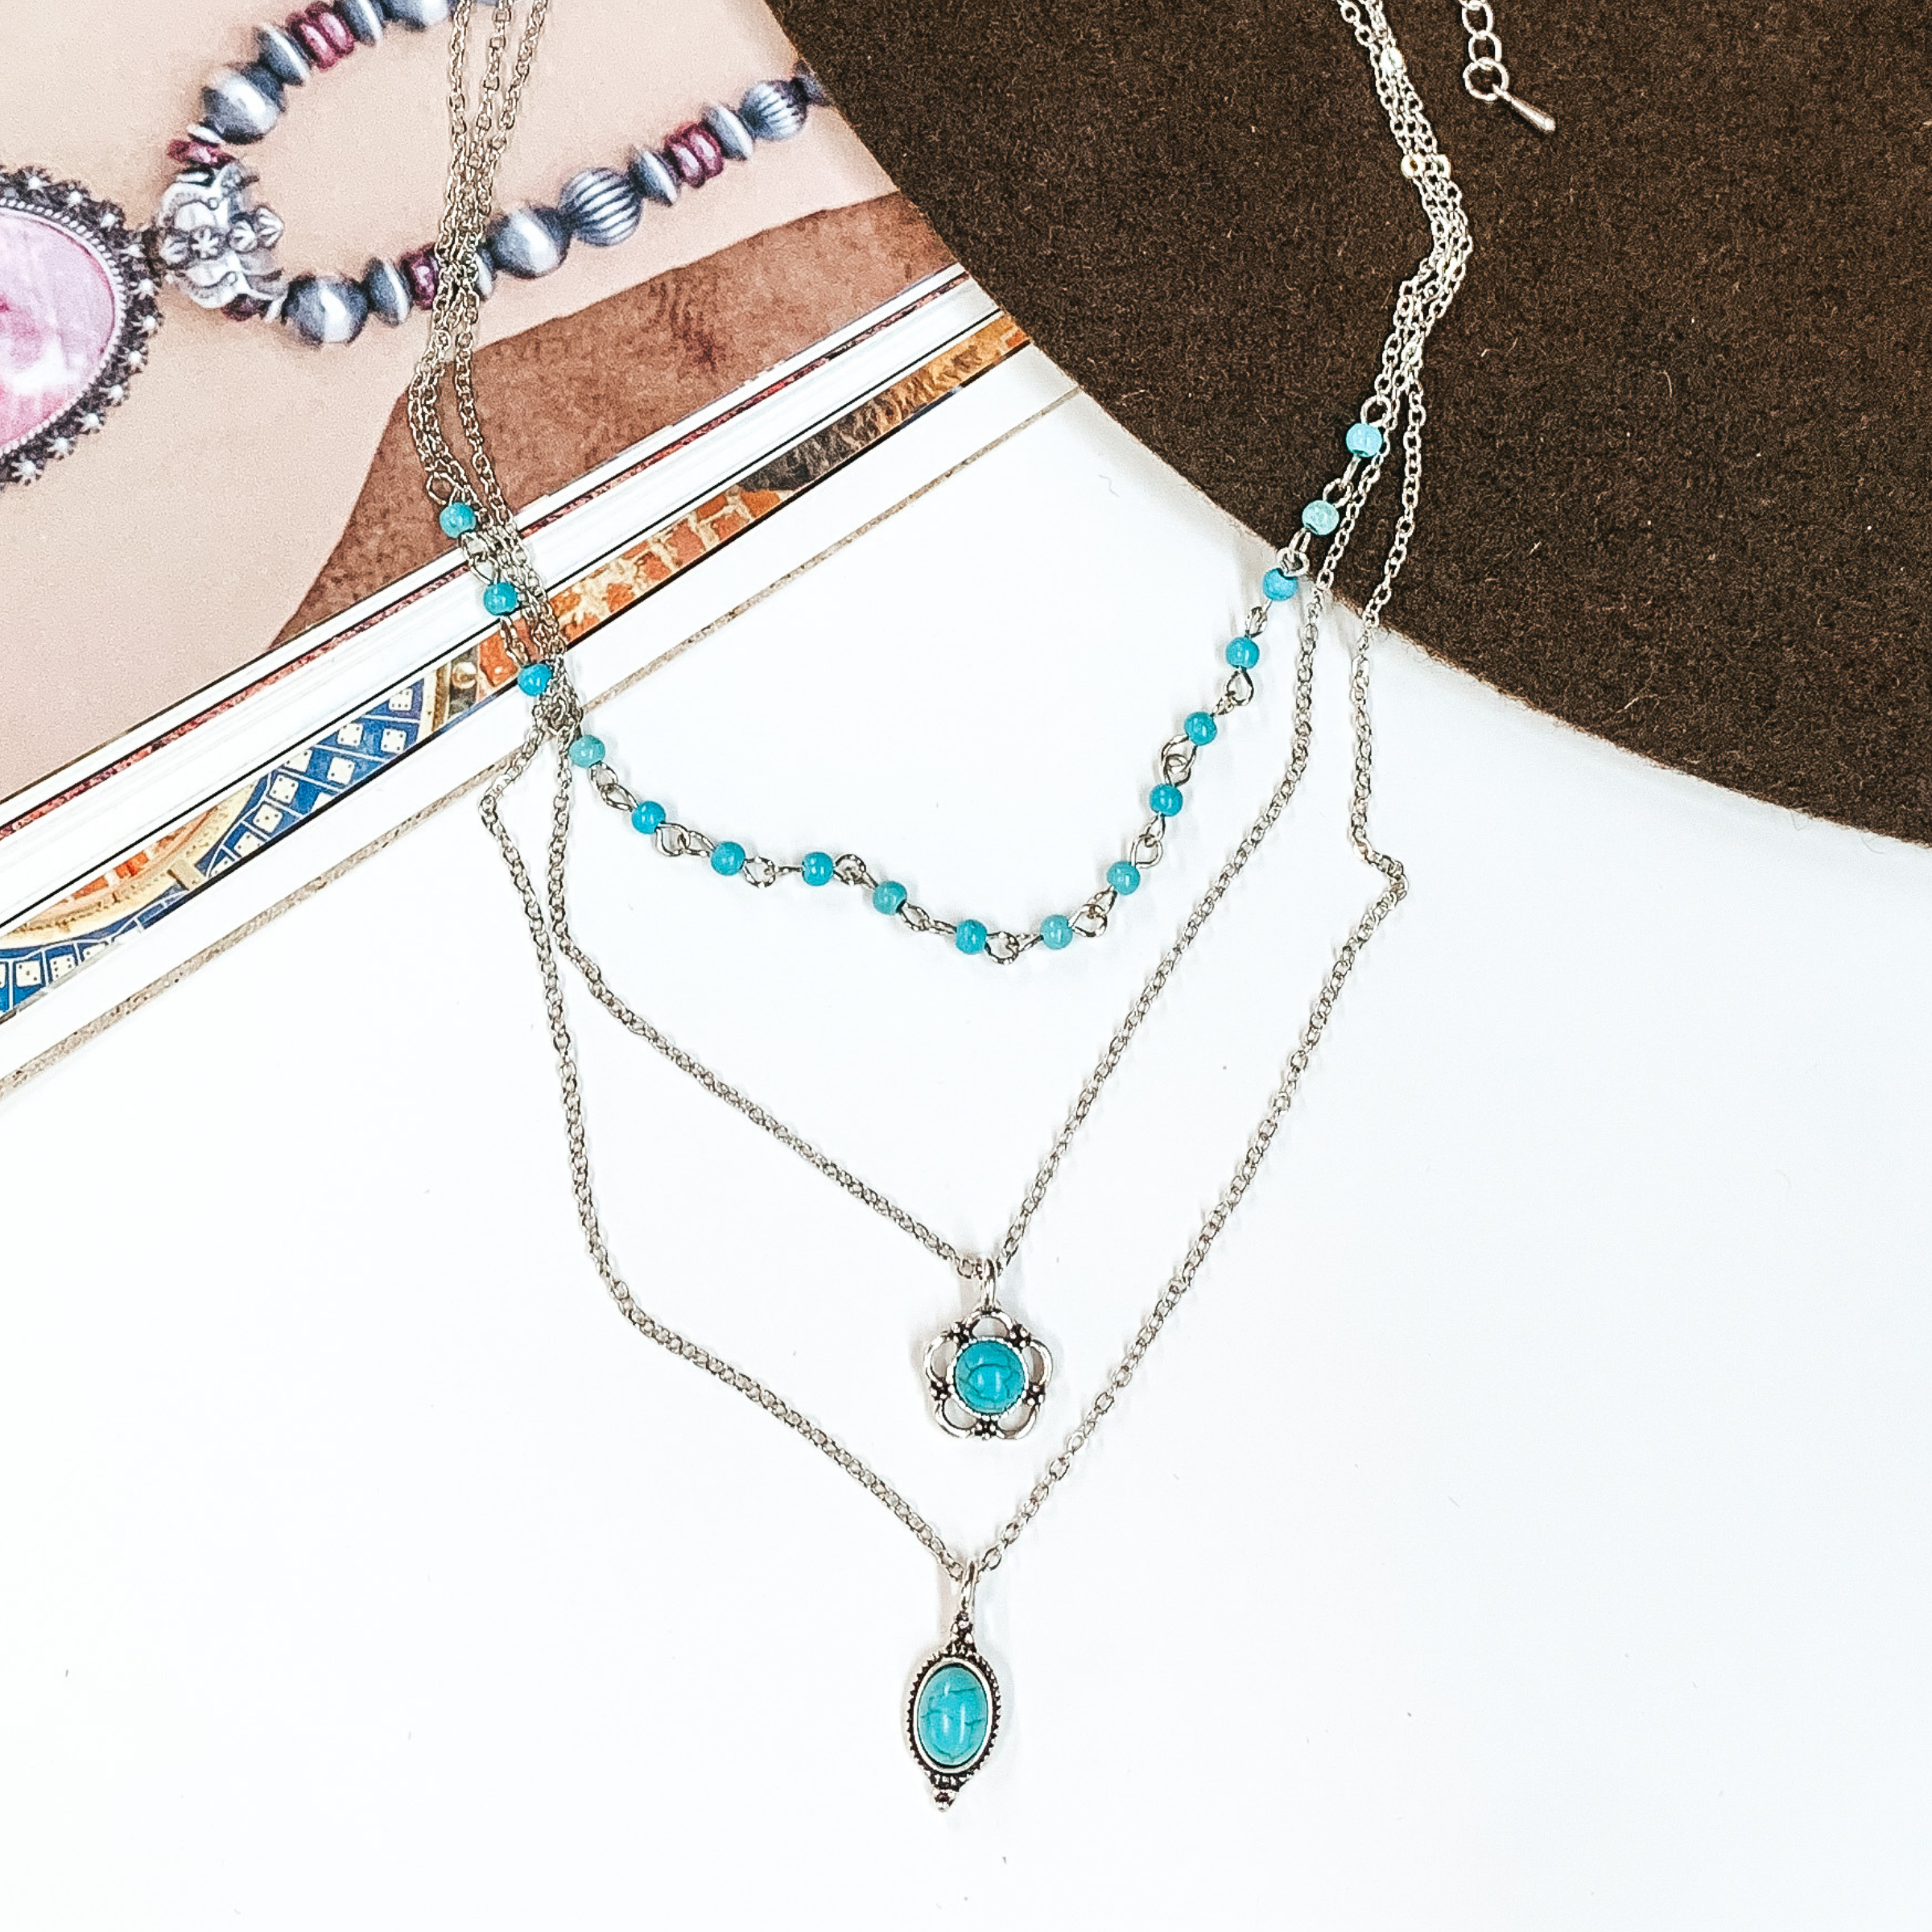 Triple layered, silver, chain necklaces. Two strands have a small turquoise stone pendant with a silver outlining and the shortest chain has a turquoise beaded section. This necklace is pictured partially on an open magazine on a white background. 